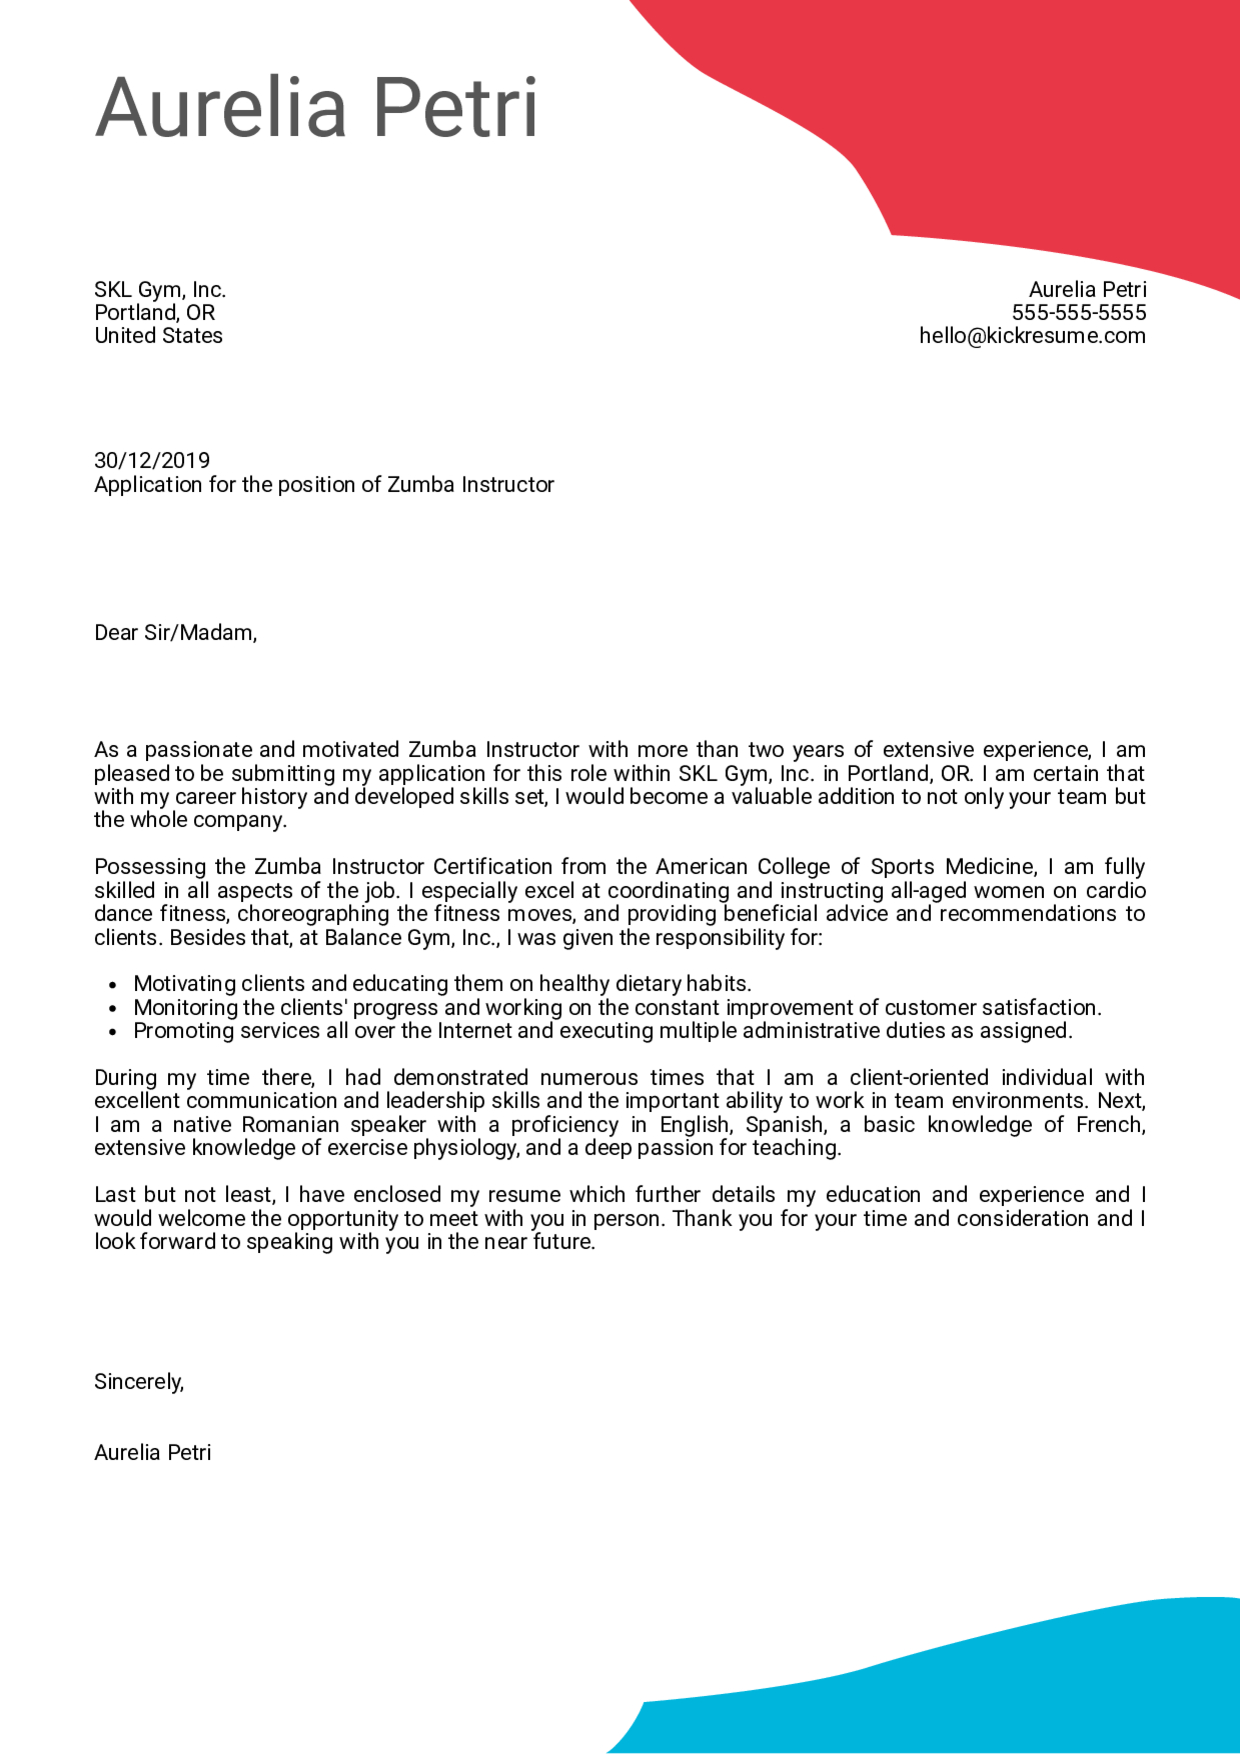 Recommendation Letter For Zumba Instructor • Invitation Template Ideas